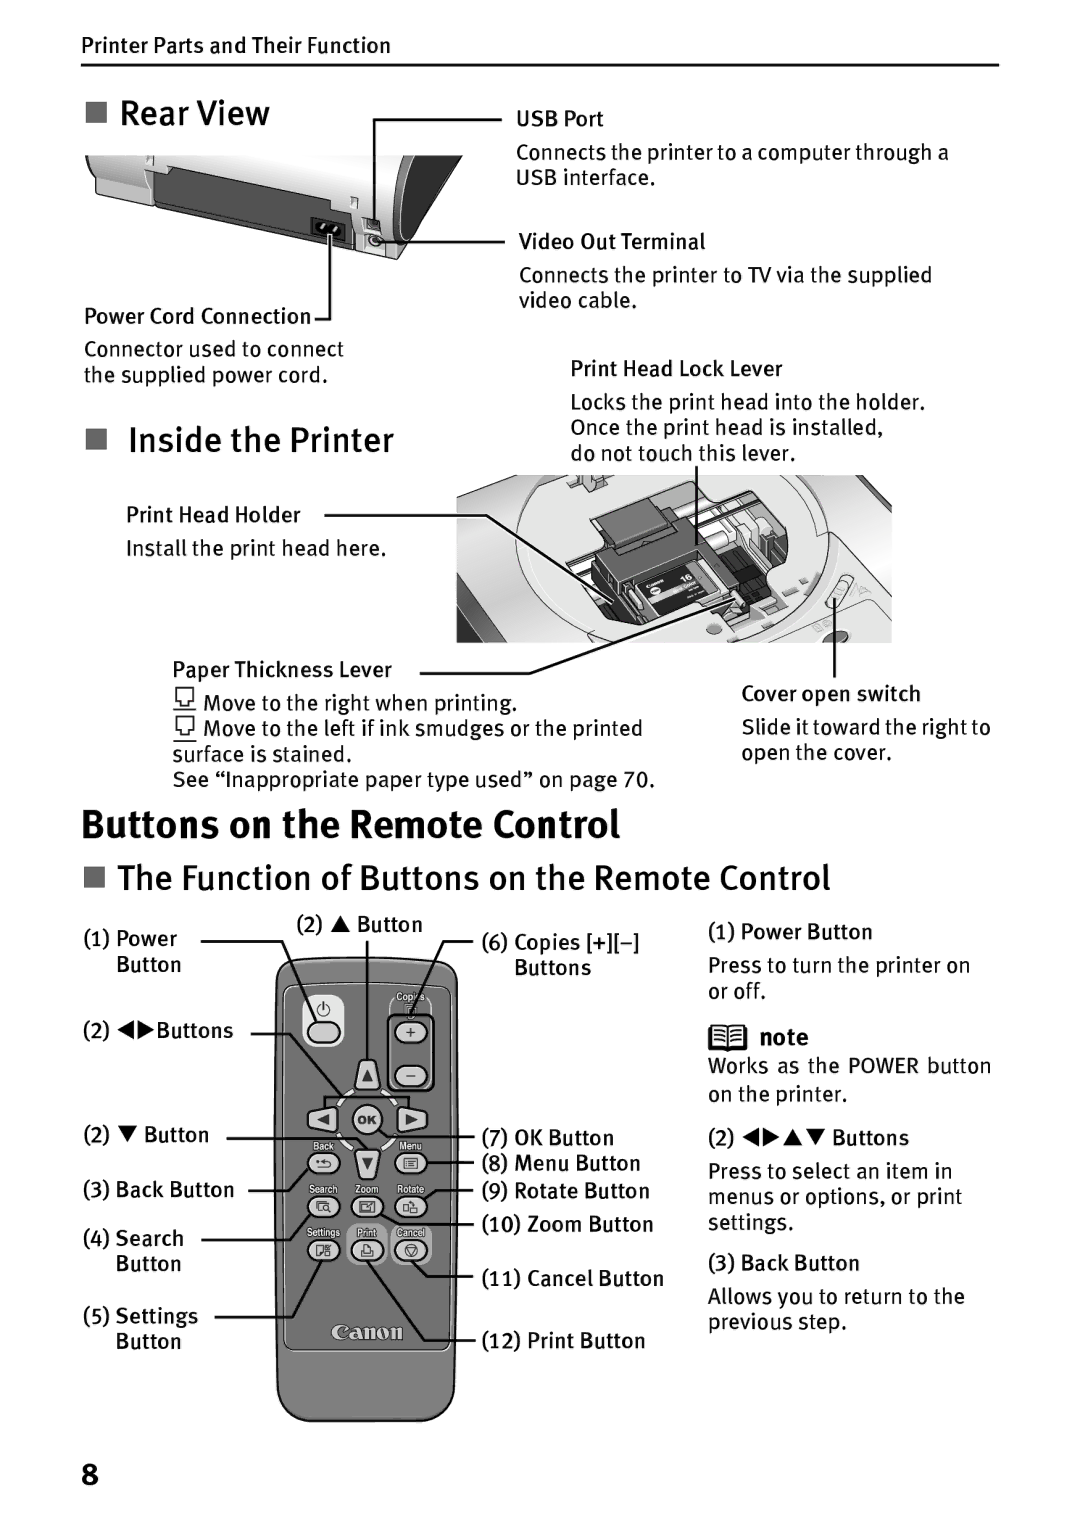 Canon DS700 manual Buttons on the Remote Control, Supplied power cord, Move to the left if ink smudges or the printed 